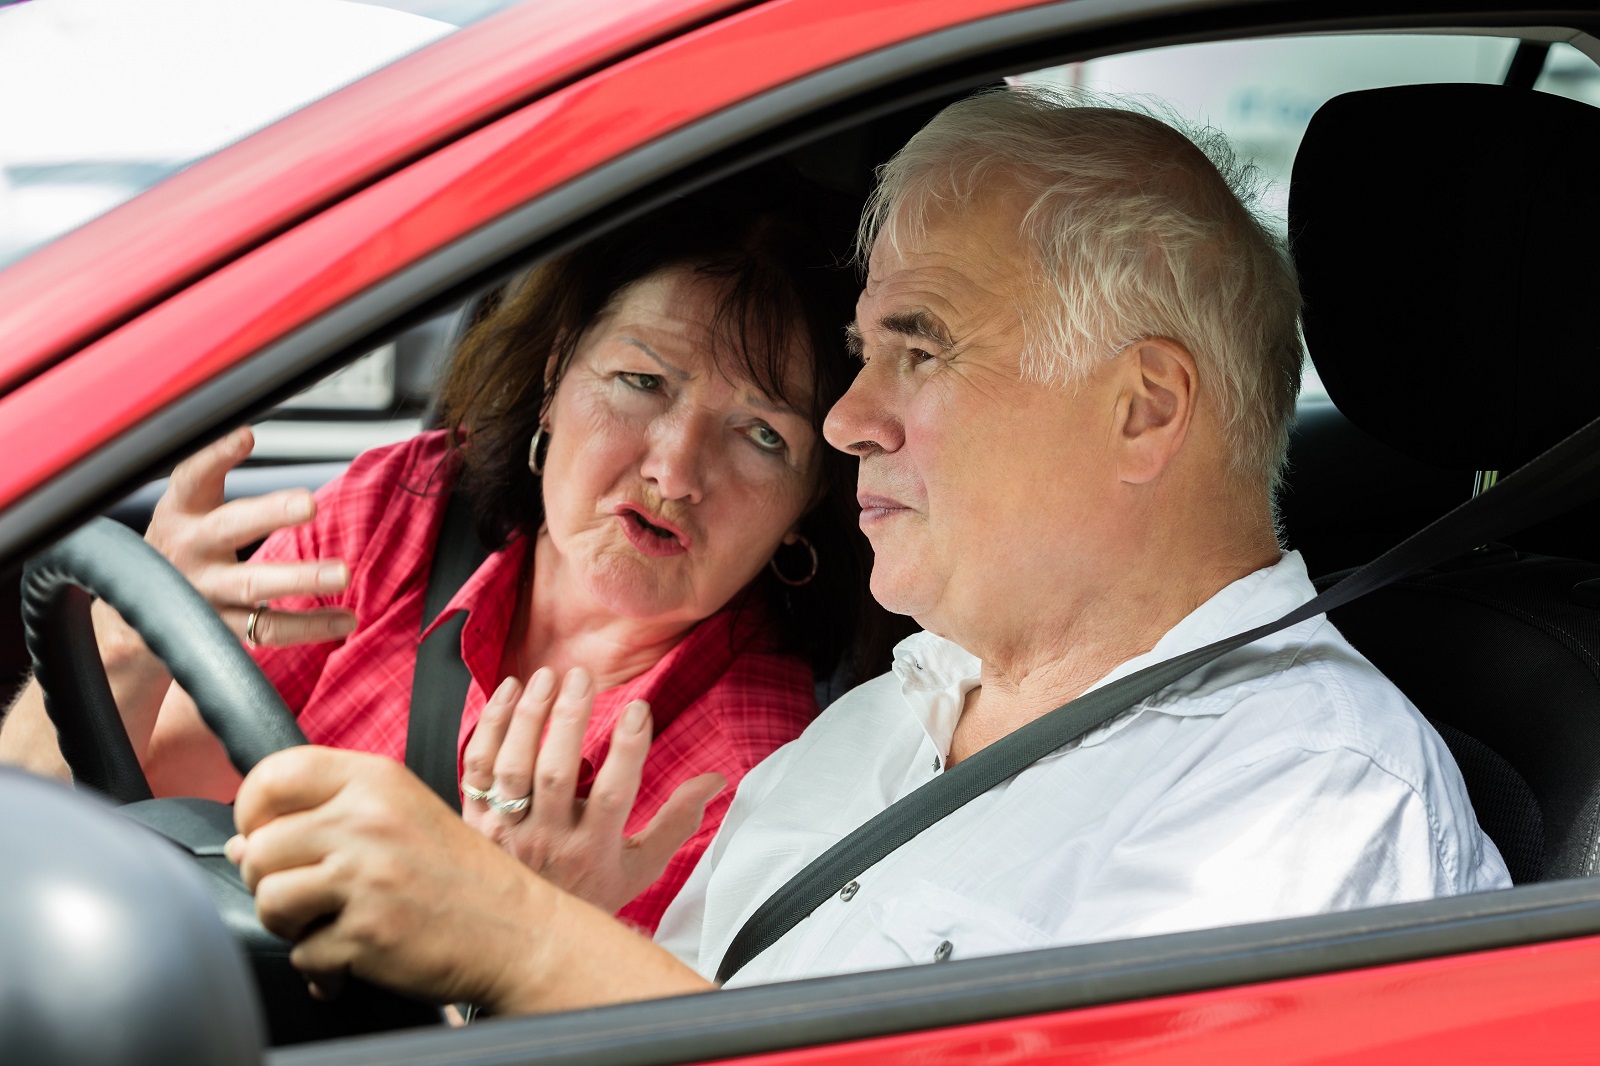 Unhappy Senior Couple Arguing In A Car, Image: 305314463, License: Royalty-free, Restrictions: , Model Release: yes, Credit line: Andriy Popov / Panthermedia / Profimedia